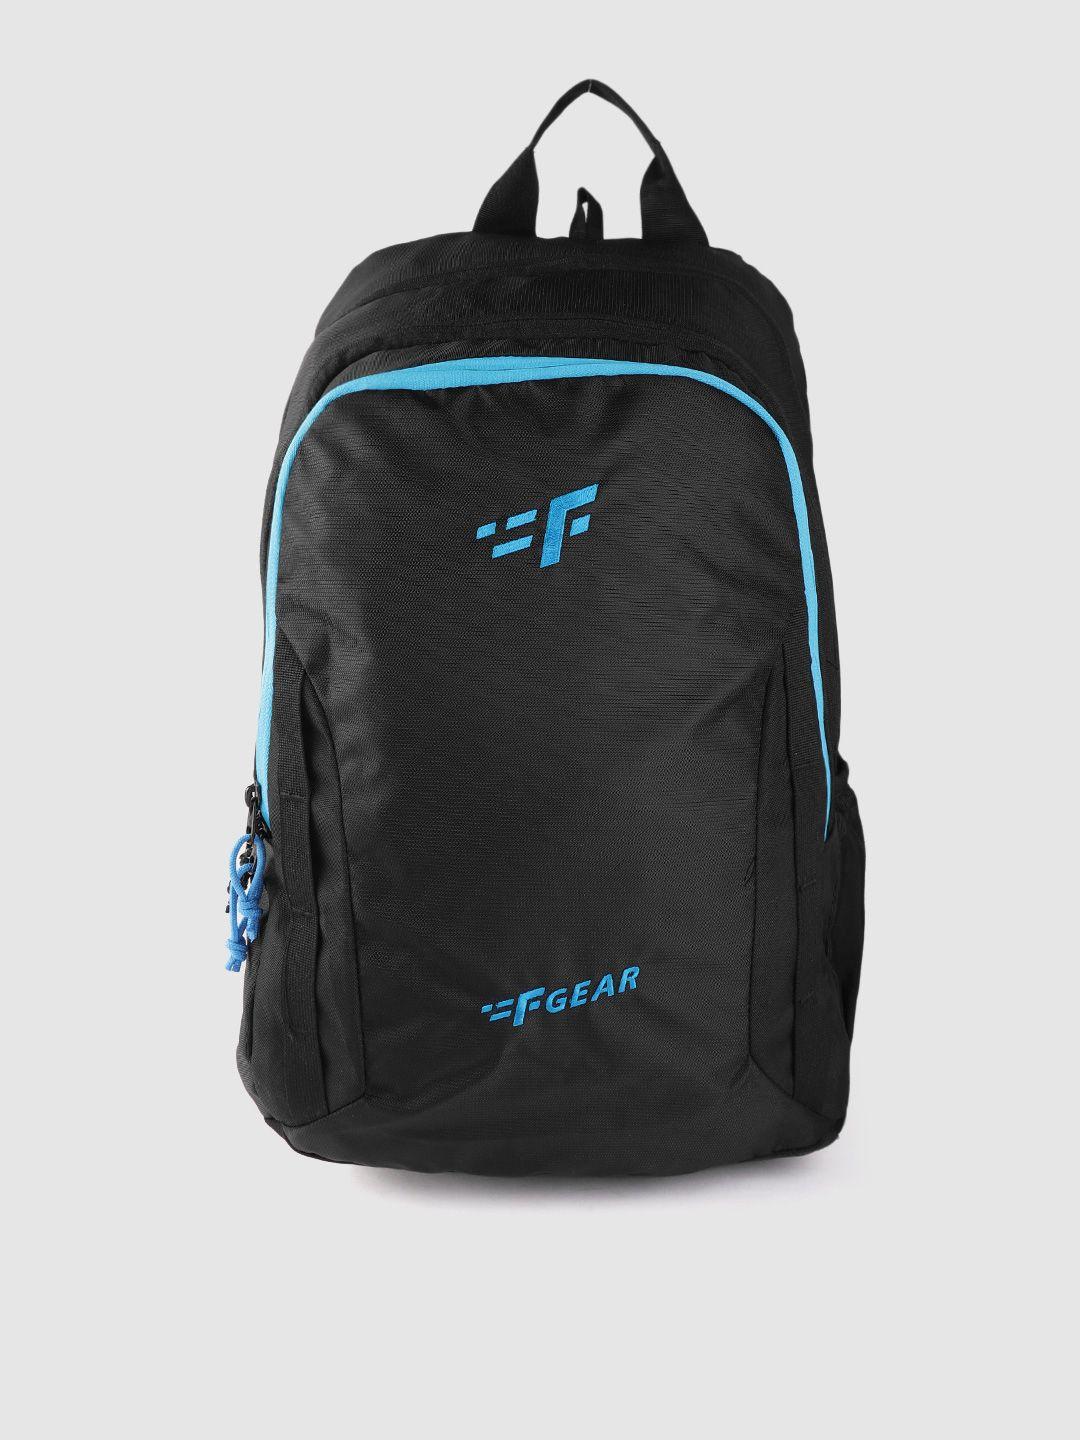 f gear unisex black solid backpack